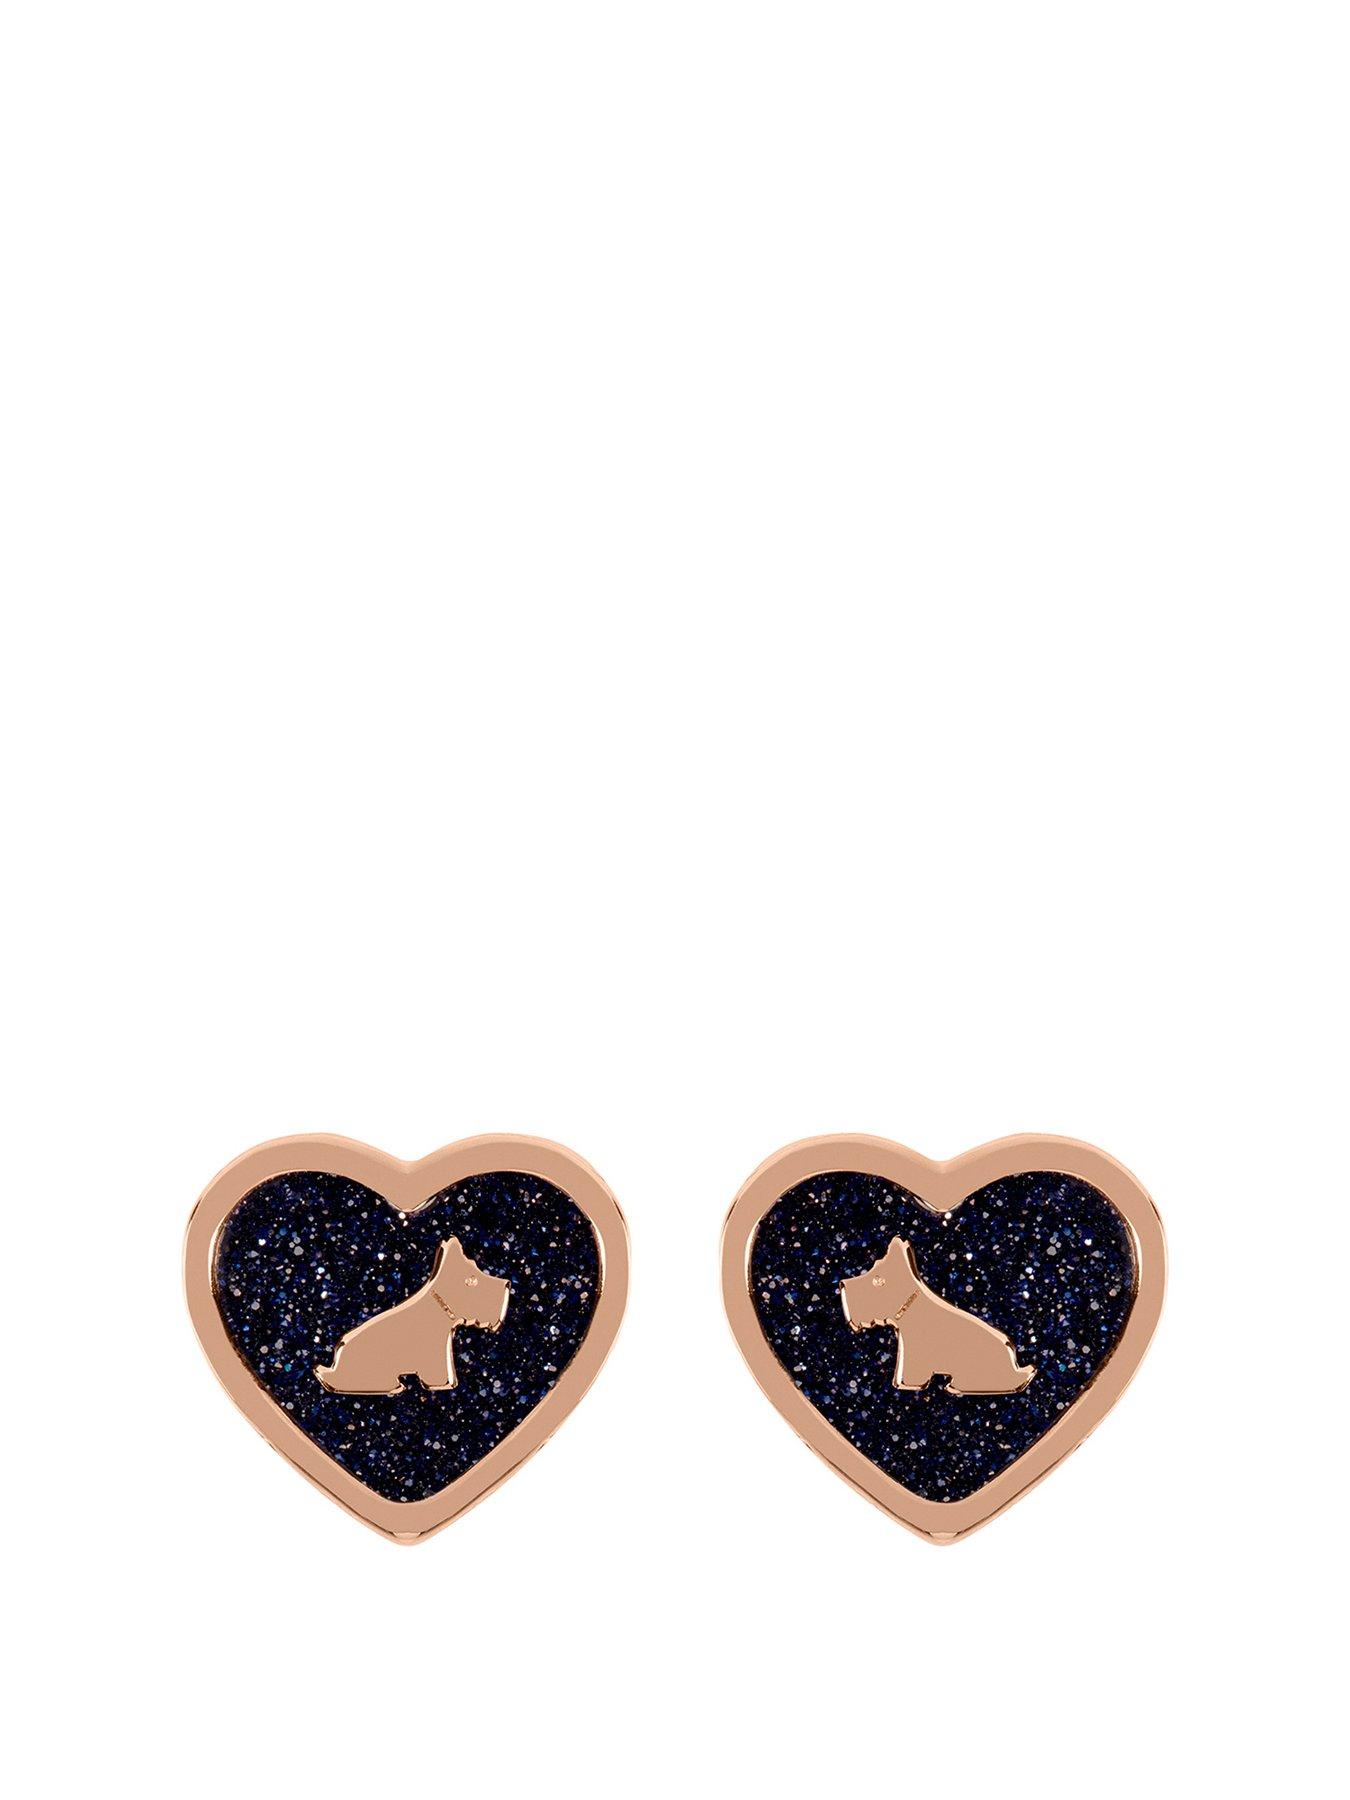  Ladies 18ct Rose Gold Plated Blue Heart Stud Earrings with Sitting Dog Design